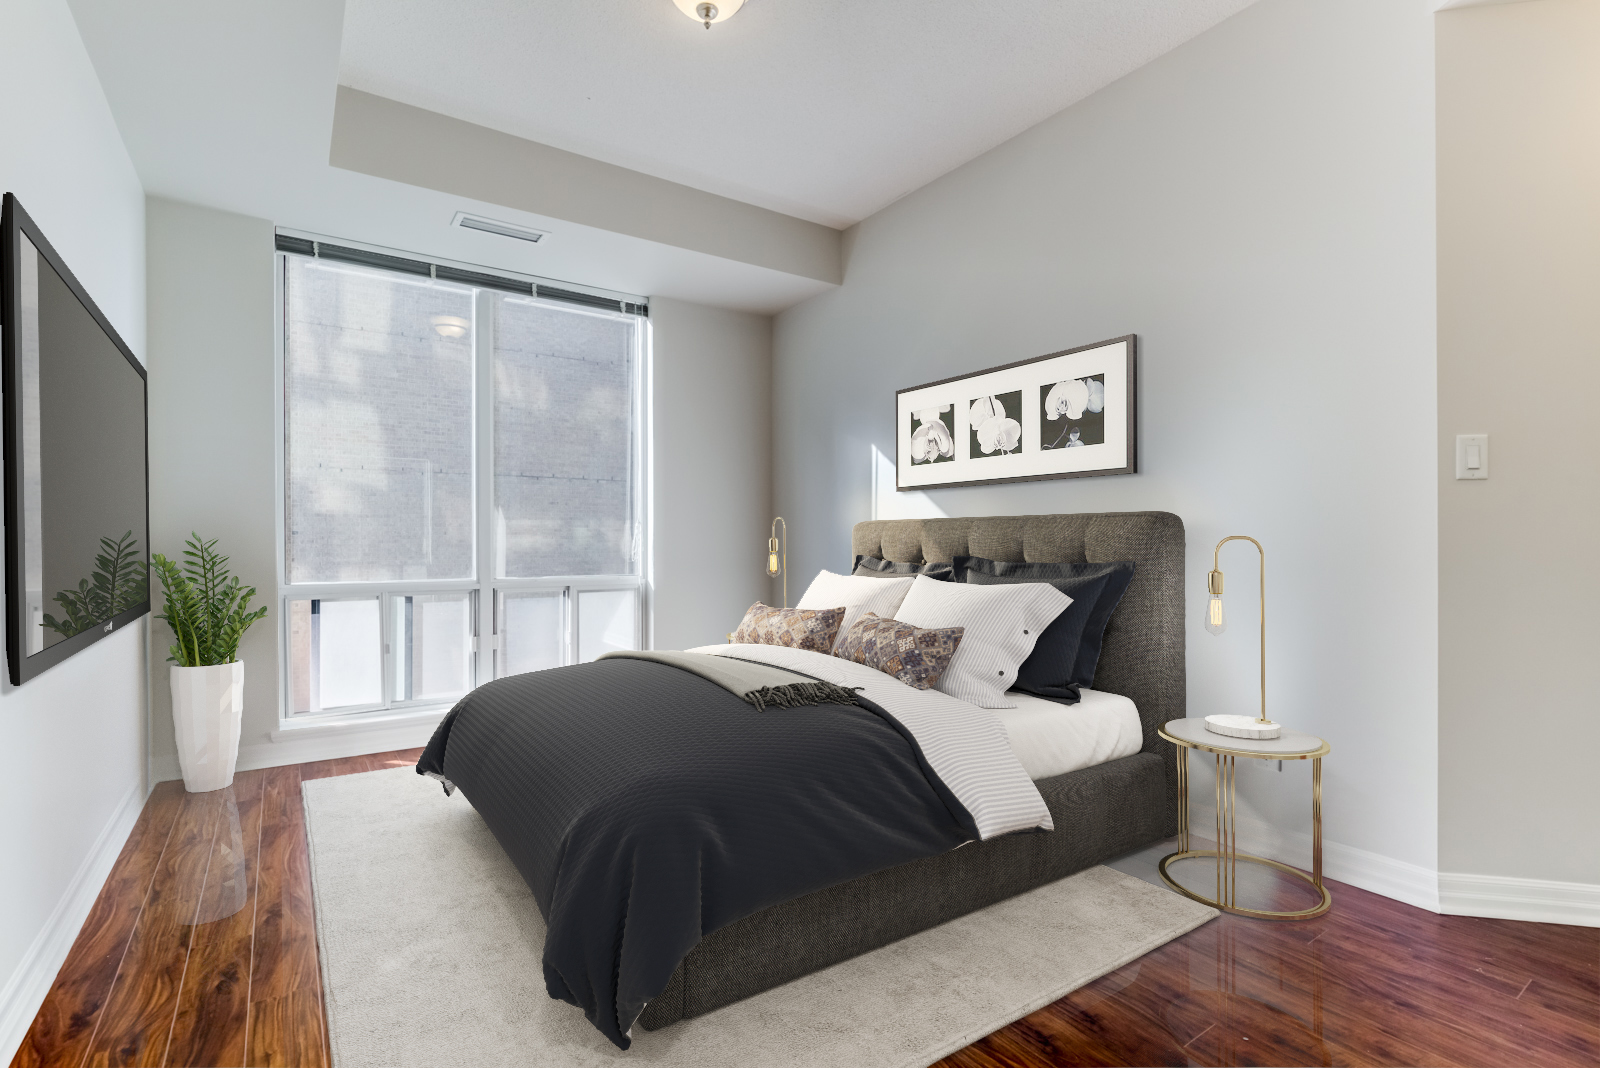 Master bedroom at 300 Bloor St E Unit 1809 with 3D rendered table lamp, carpet and bed with dark sheets.